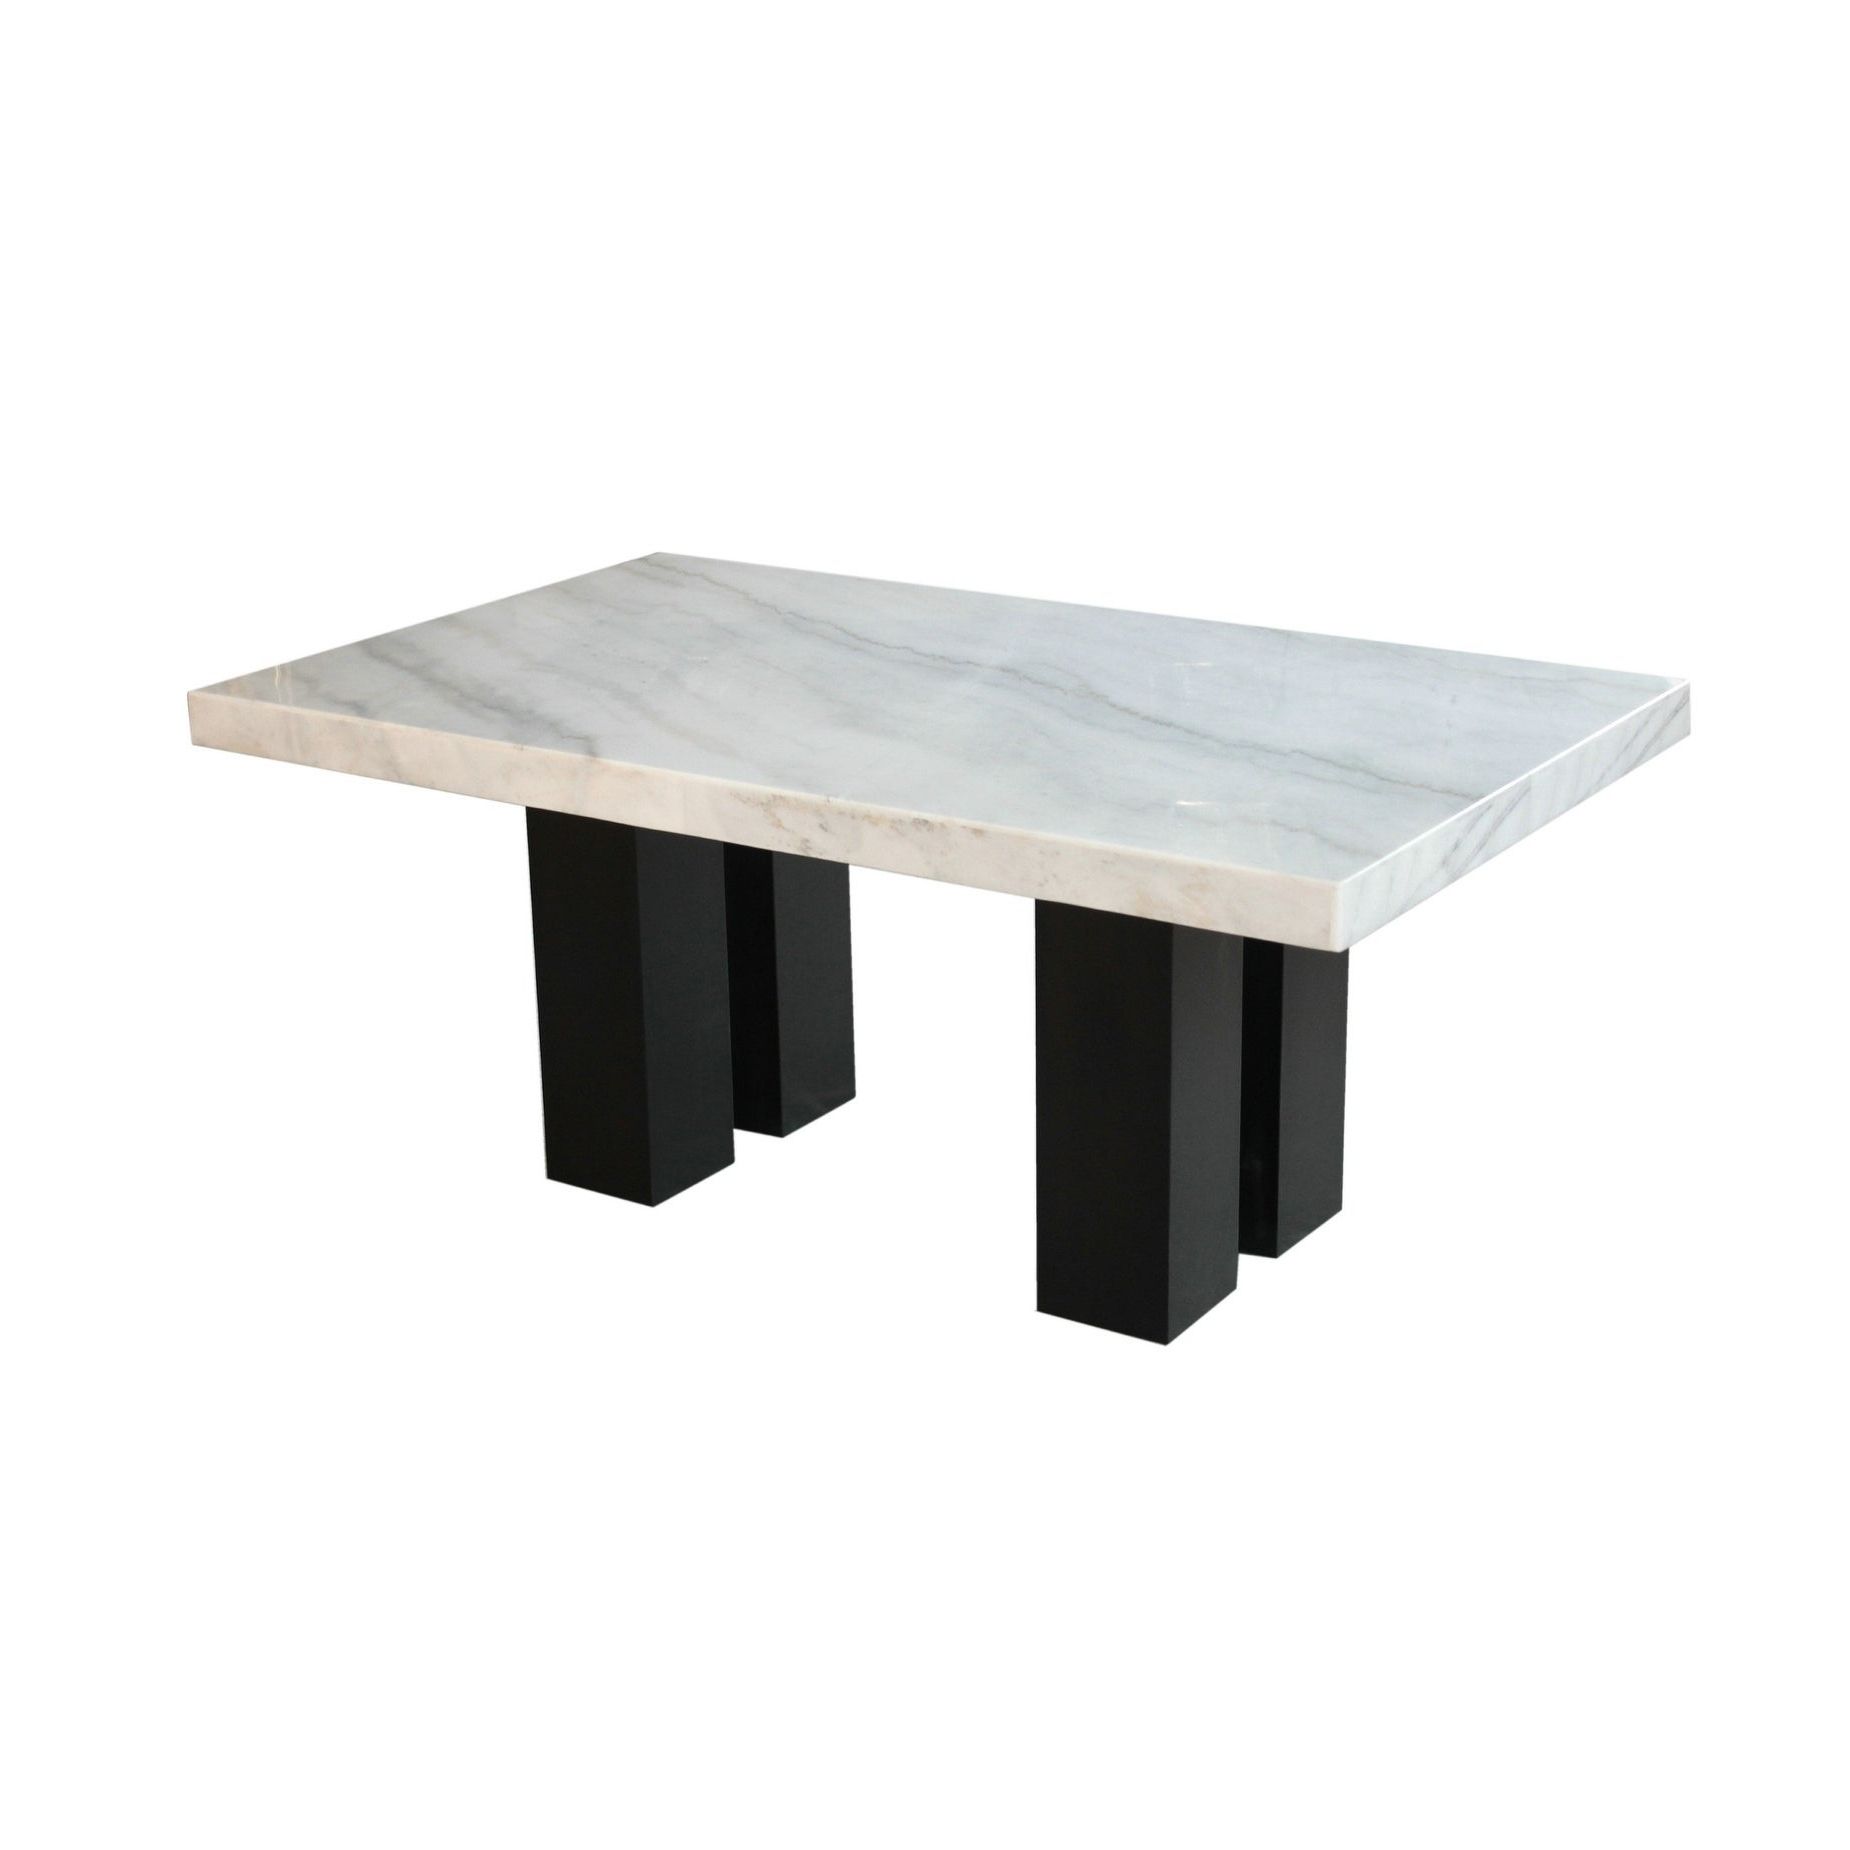 Well Liked Buy Marble Kitchen & Dining Room Tables Online At Overstock With Thick White Marble Slab Dining Tables With Weathered Grey Finish (View 28 of 30)